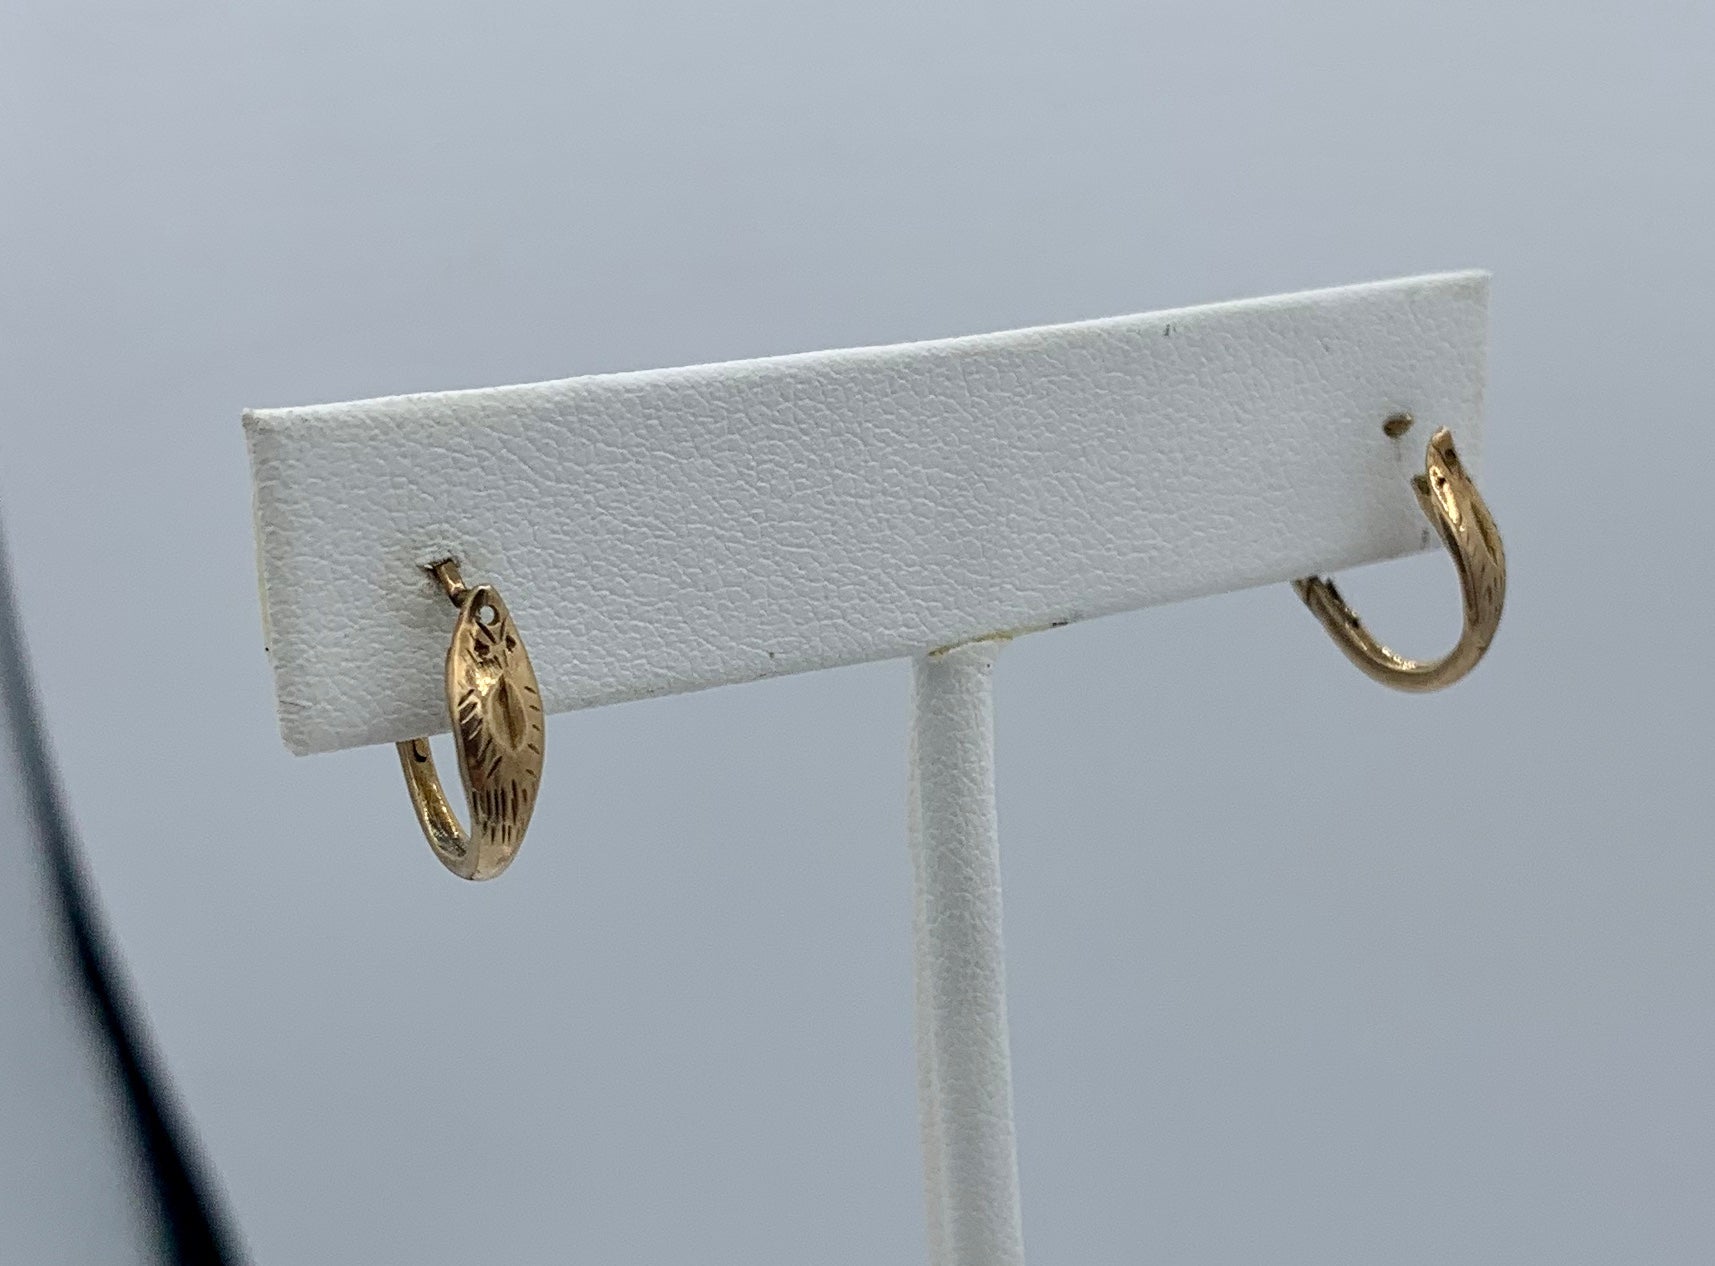 This is a rare pair of antique Snake Earrings in 14 Karat Gold.  The Etruscan Revival Victorian Hoop Earrings with snakes are just wonderful.  The snakes have beautiful engraving and the earrings are a delight.  The hoop earrings are a small and